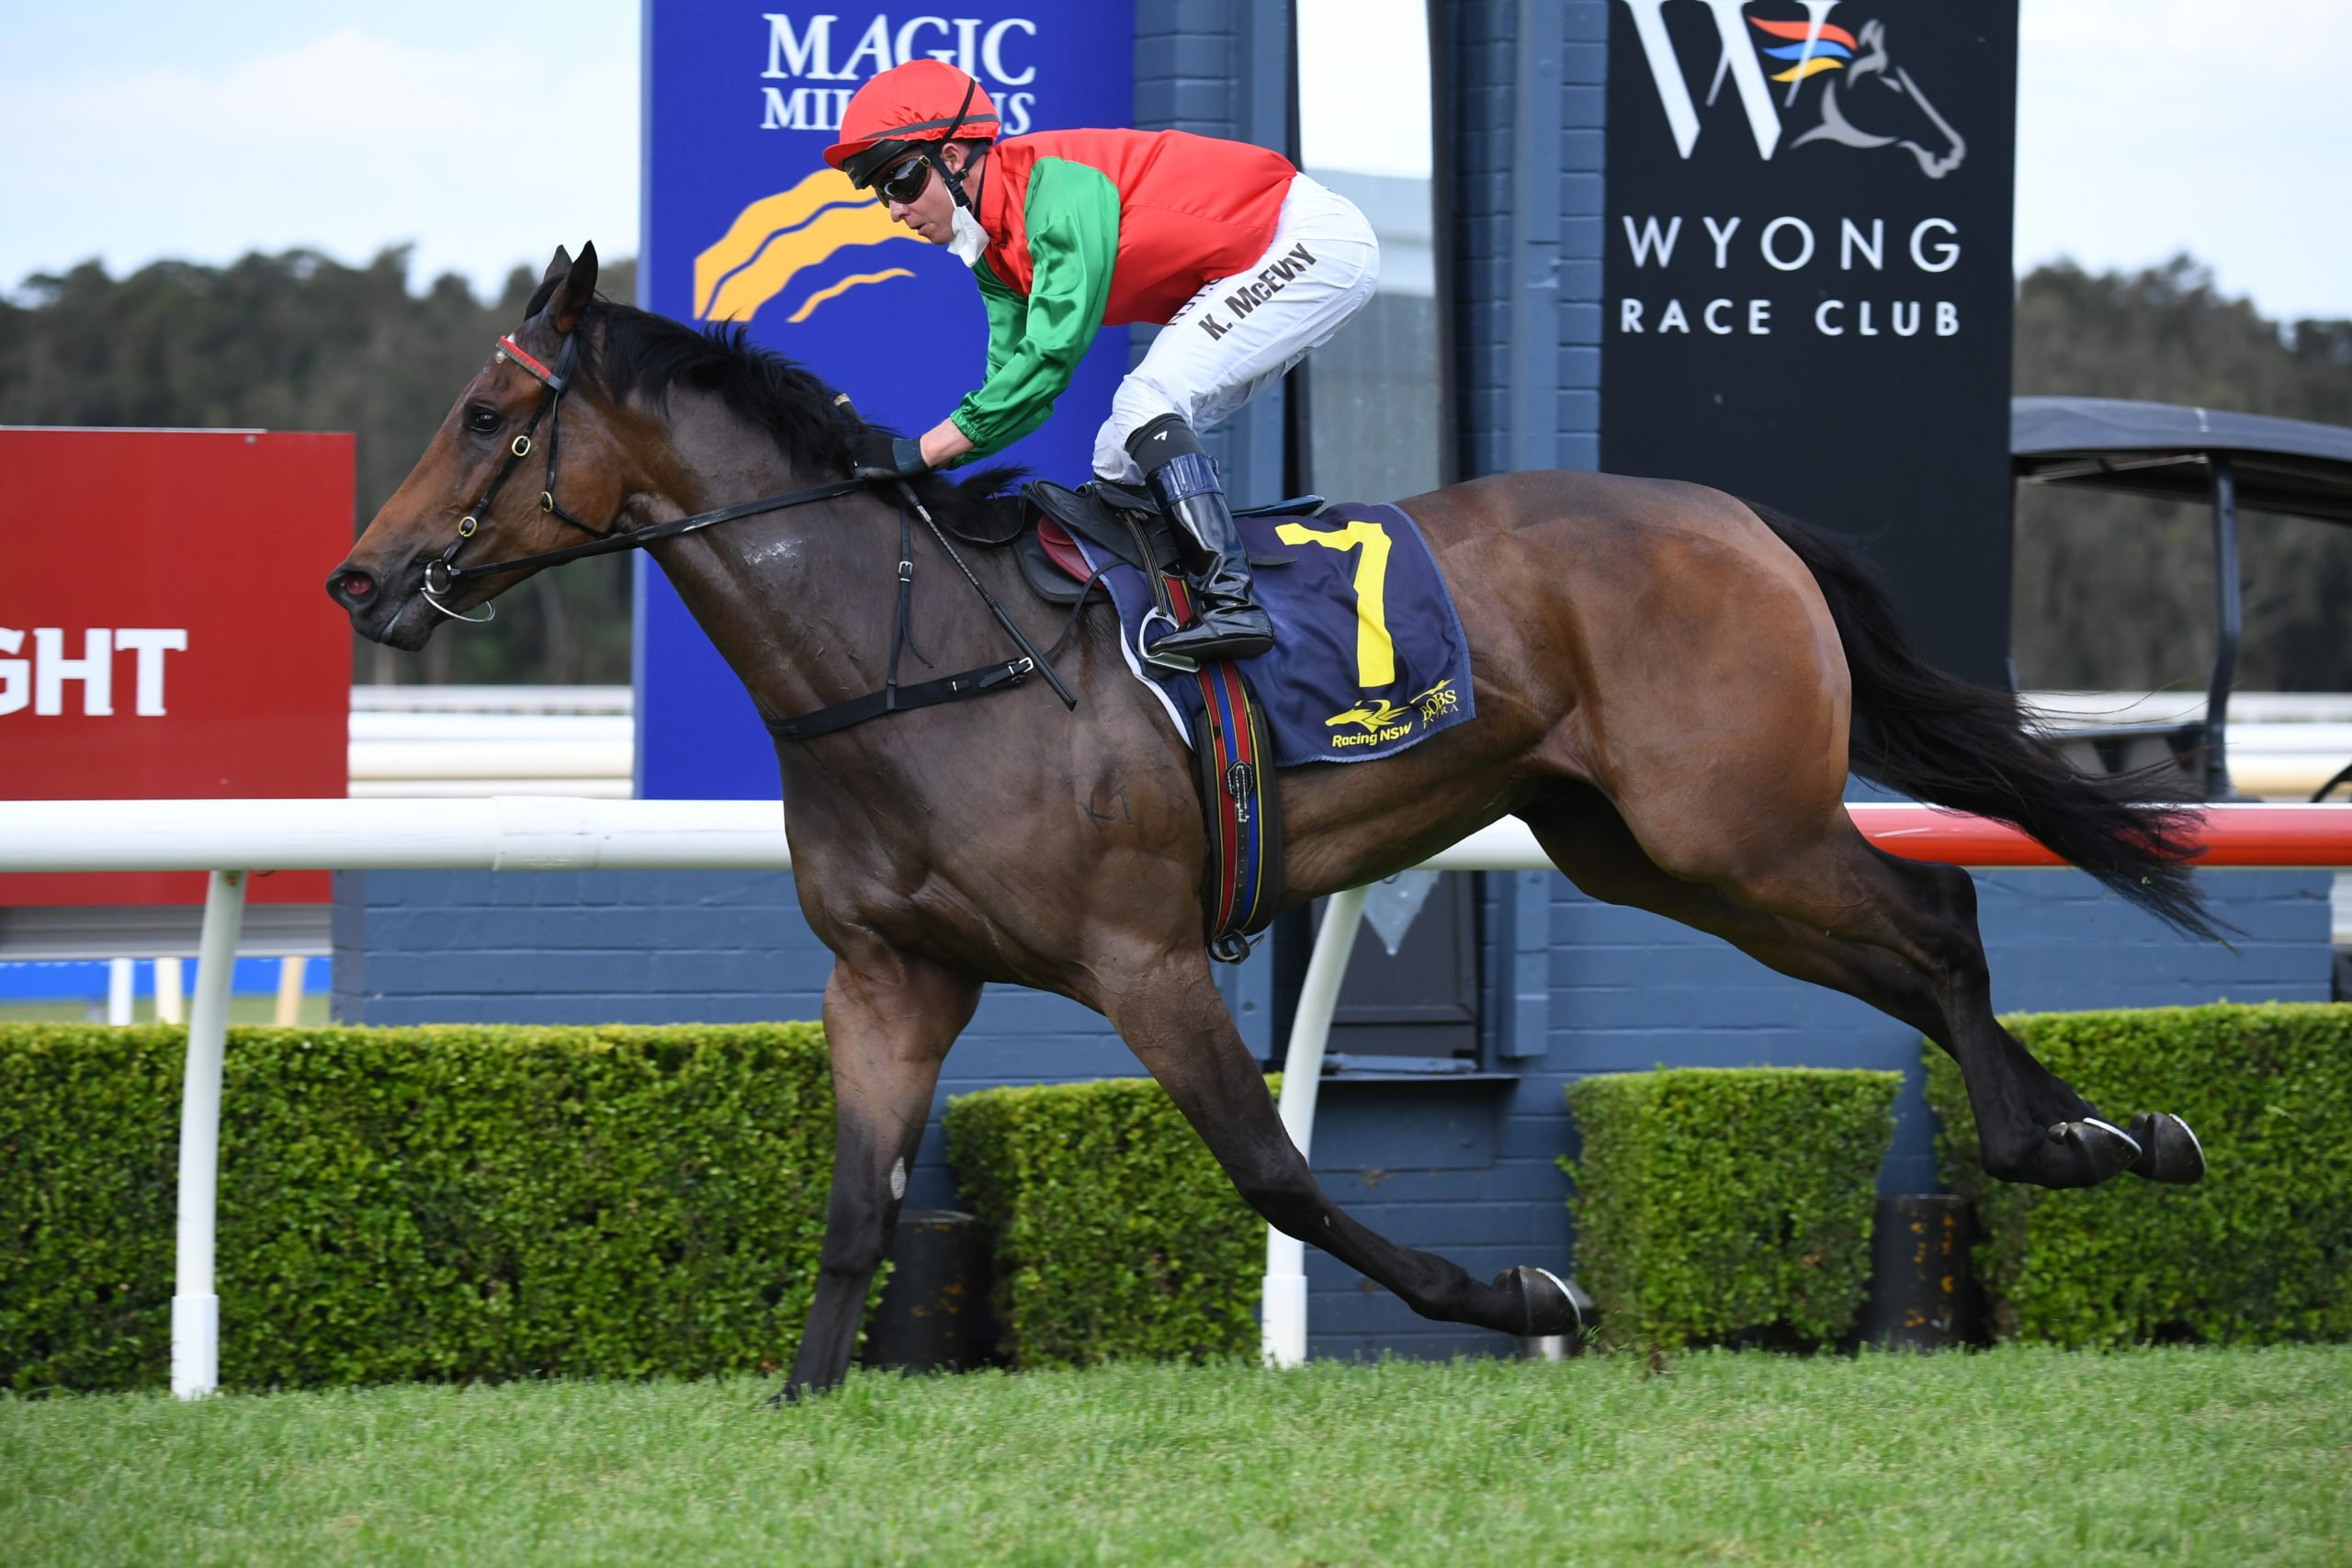 FOUR PILLARS CANDIDATES ON SHOW AT WYONG 2